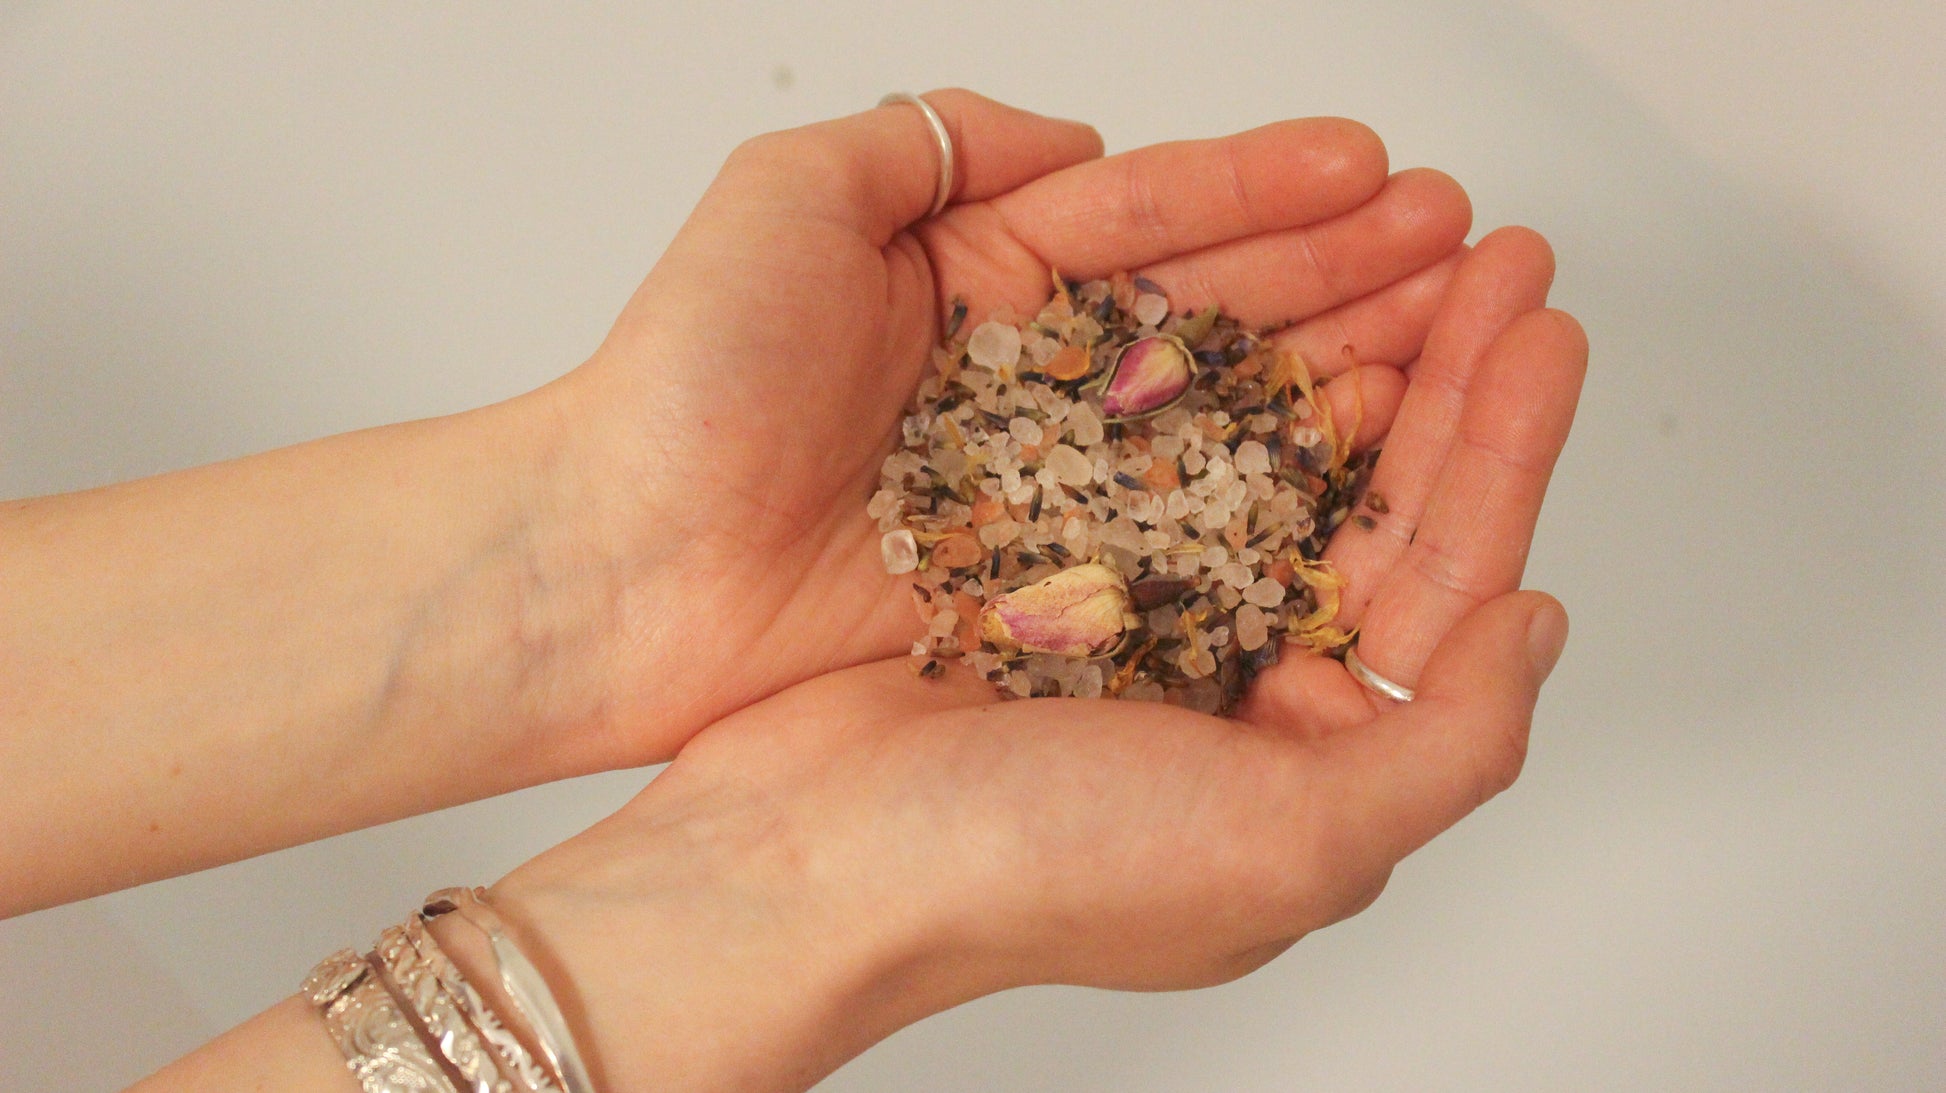 image of a white woman's hands cupped and holding some inlight beauty bath salts and wearing silver bangles and rings on their wrists and hands